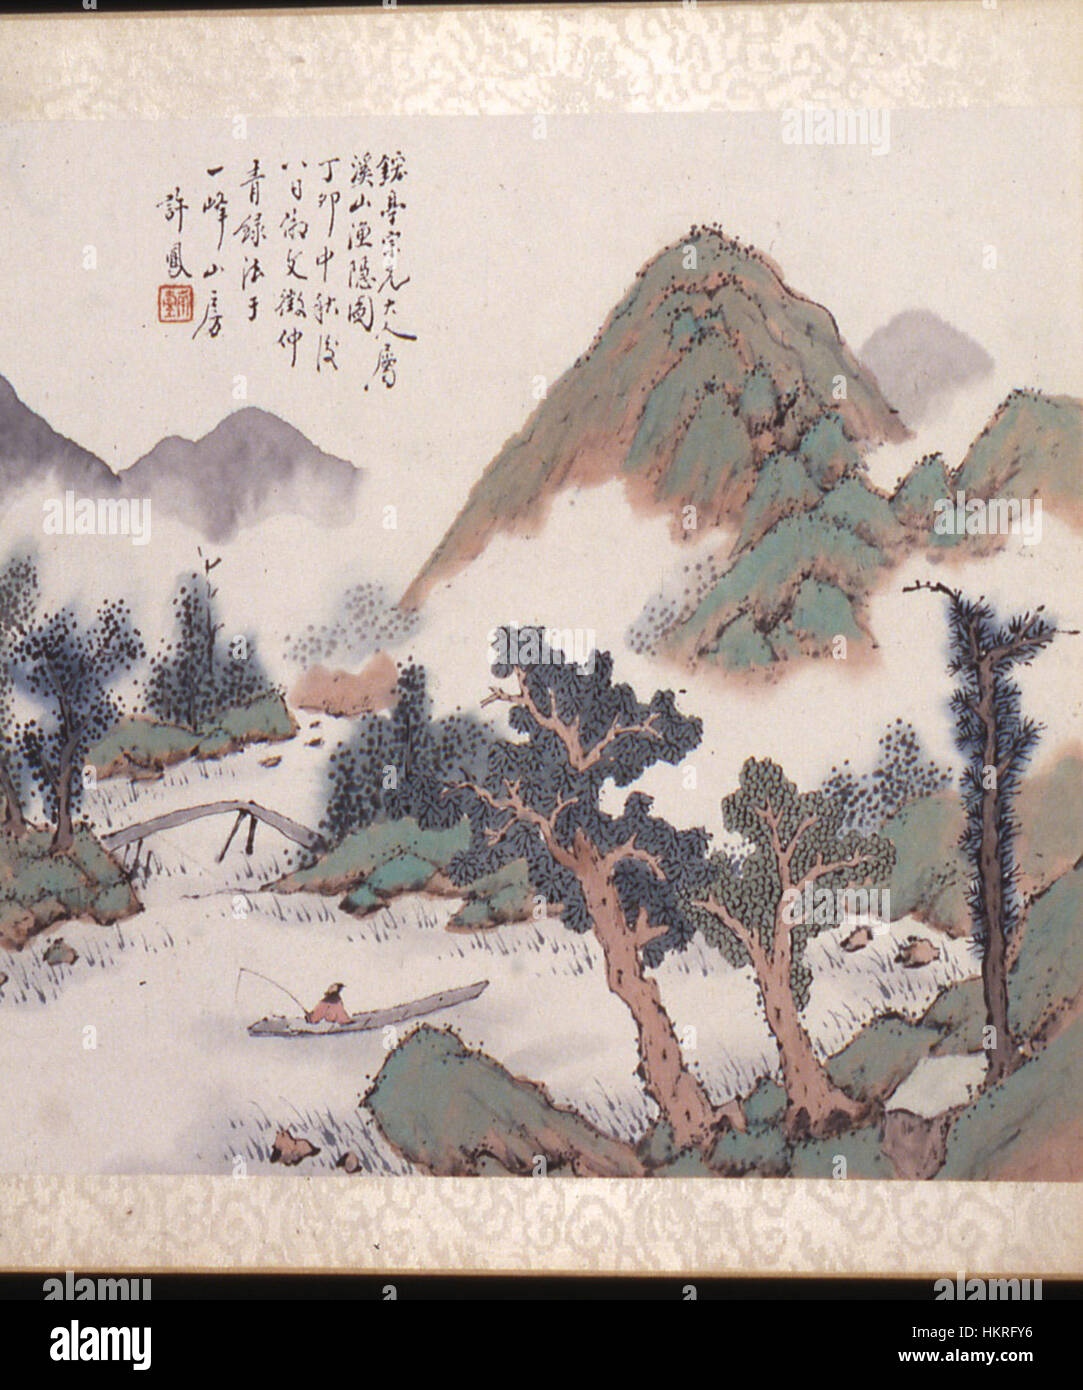 Chinois - Paysage - Walters 35101E Banque D'Images